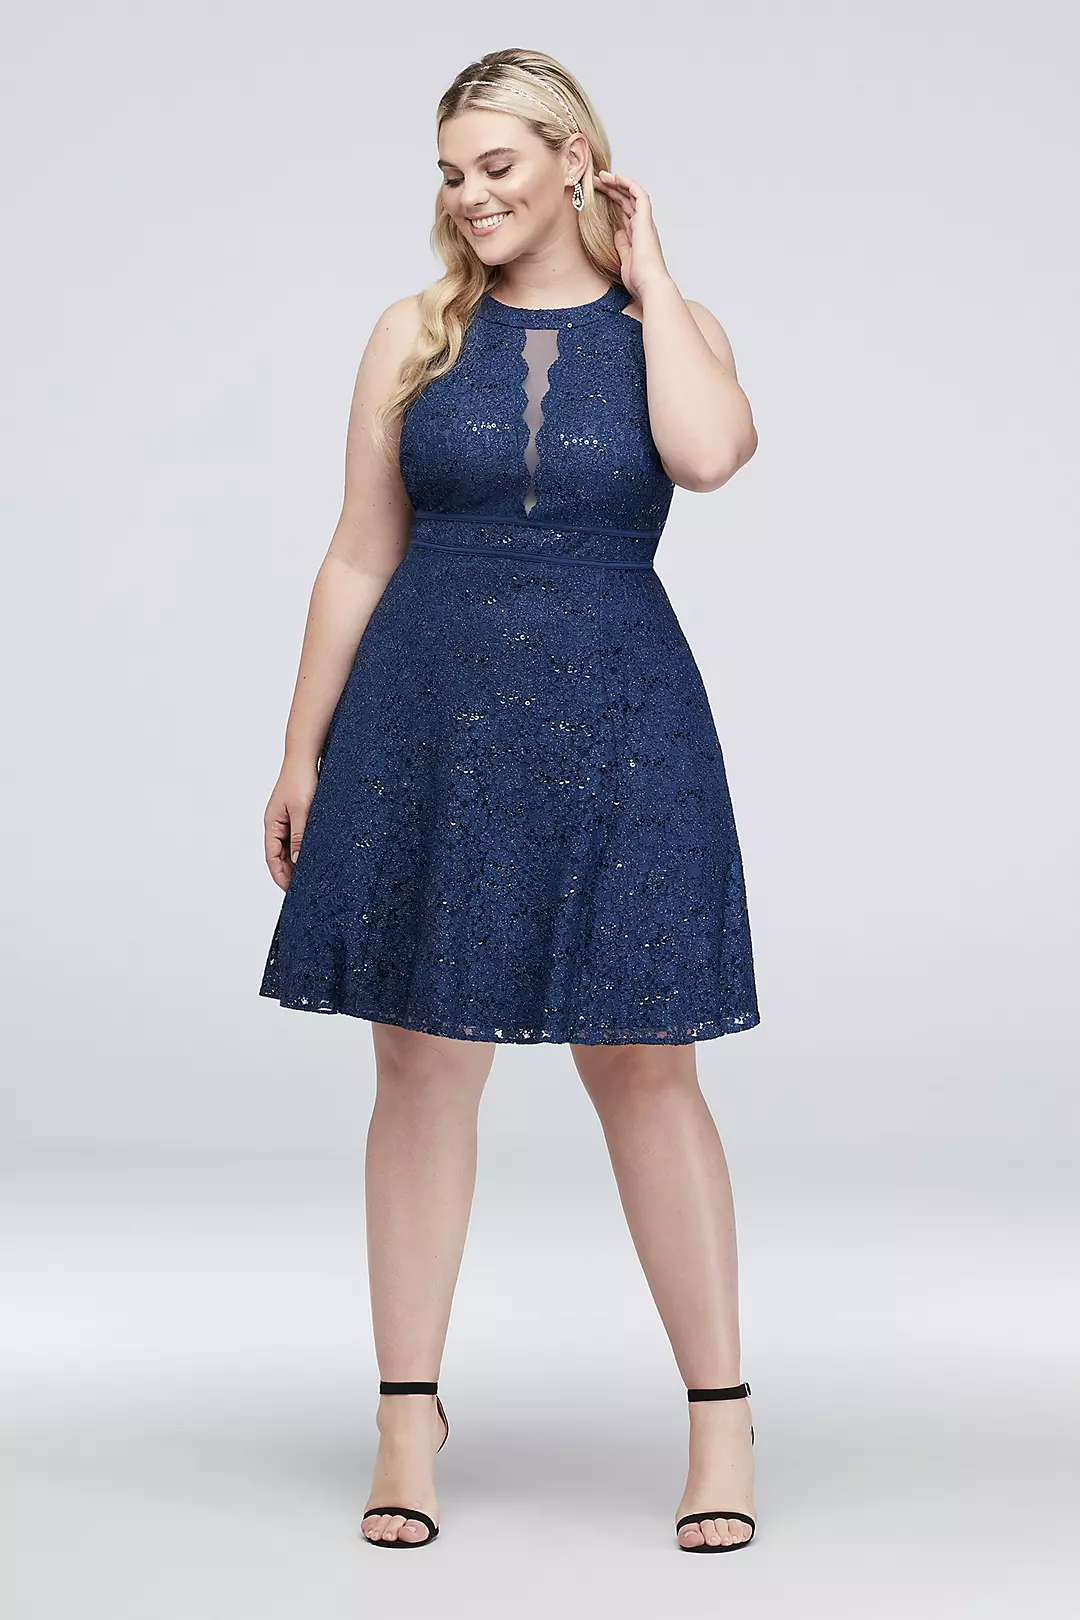 Short Halter Plus Size Dress with Illusion Inset Image